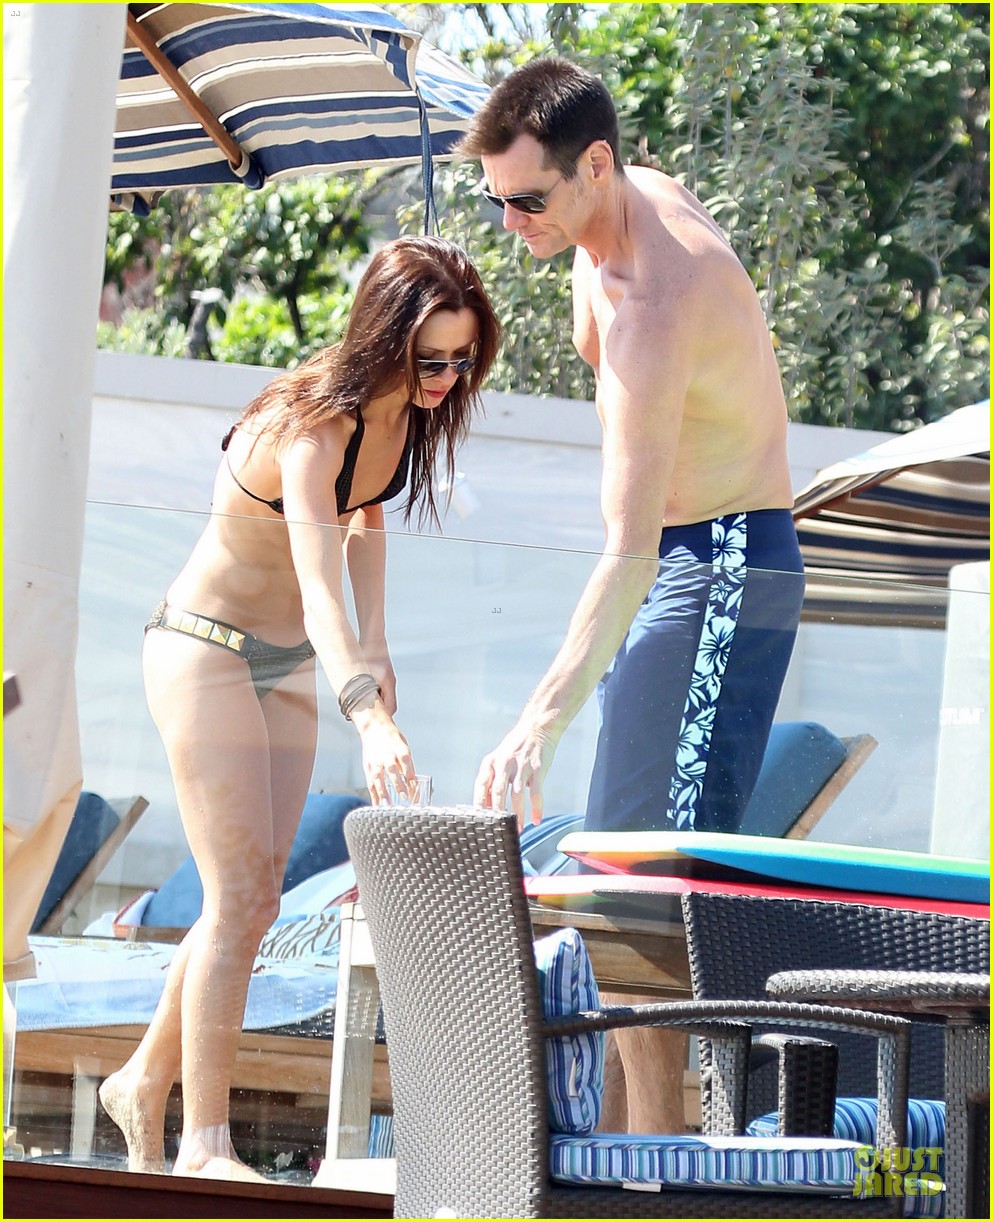 Jim Carrey shows off his shirtless body while on a beach with a mystery wom...